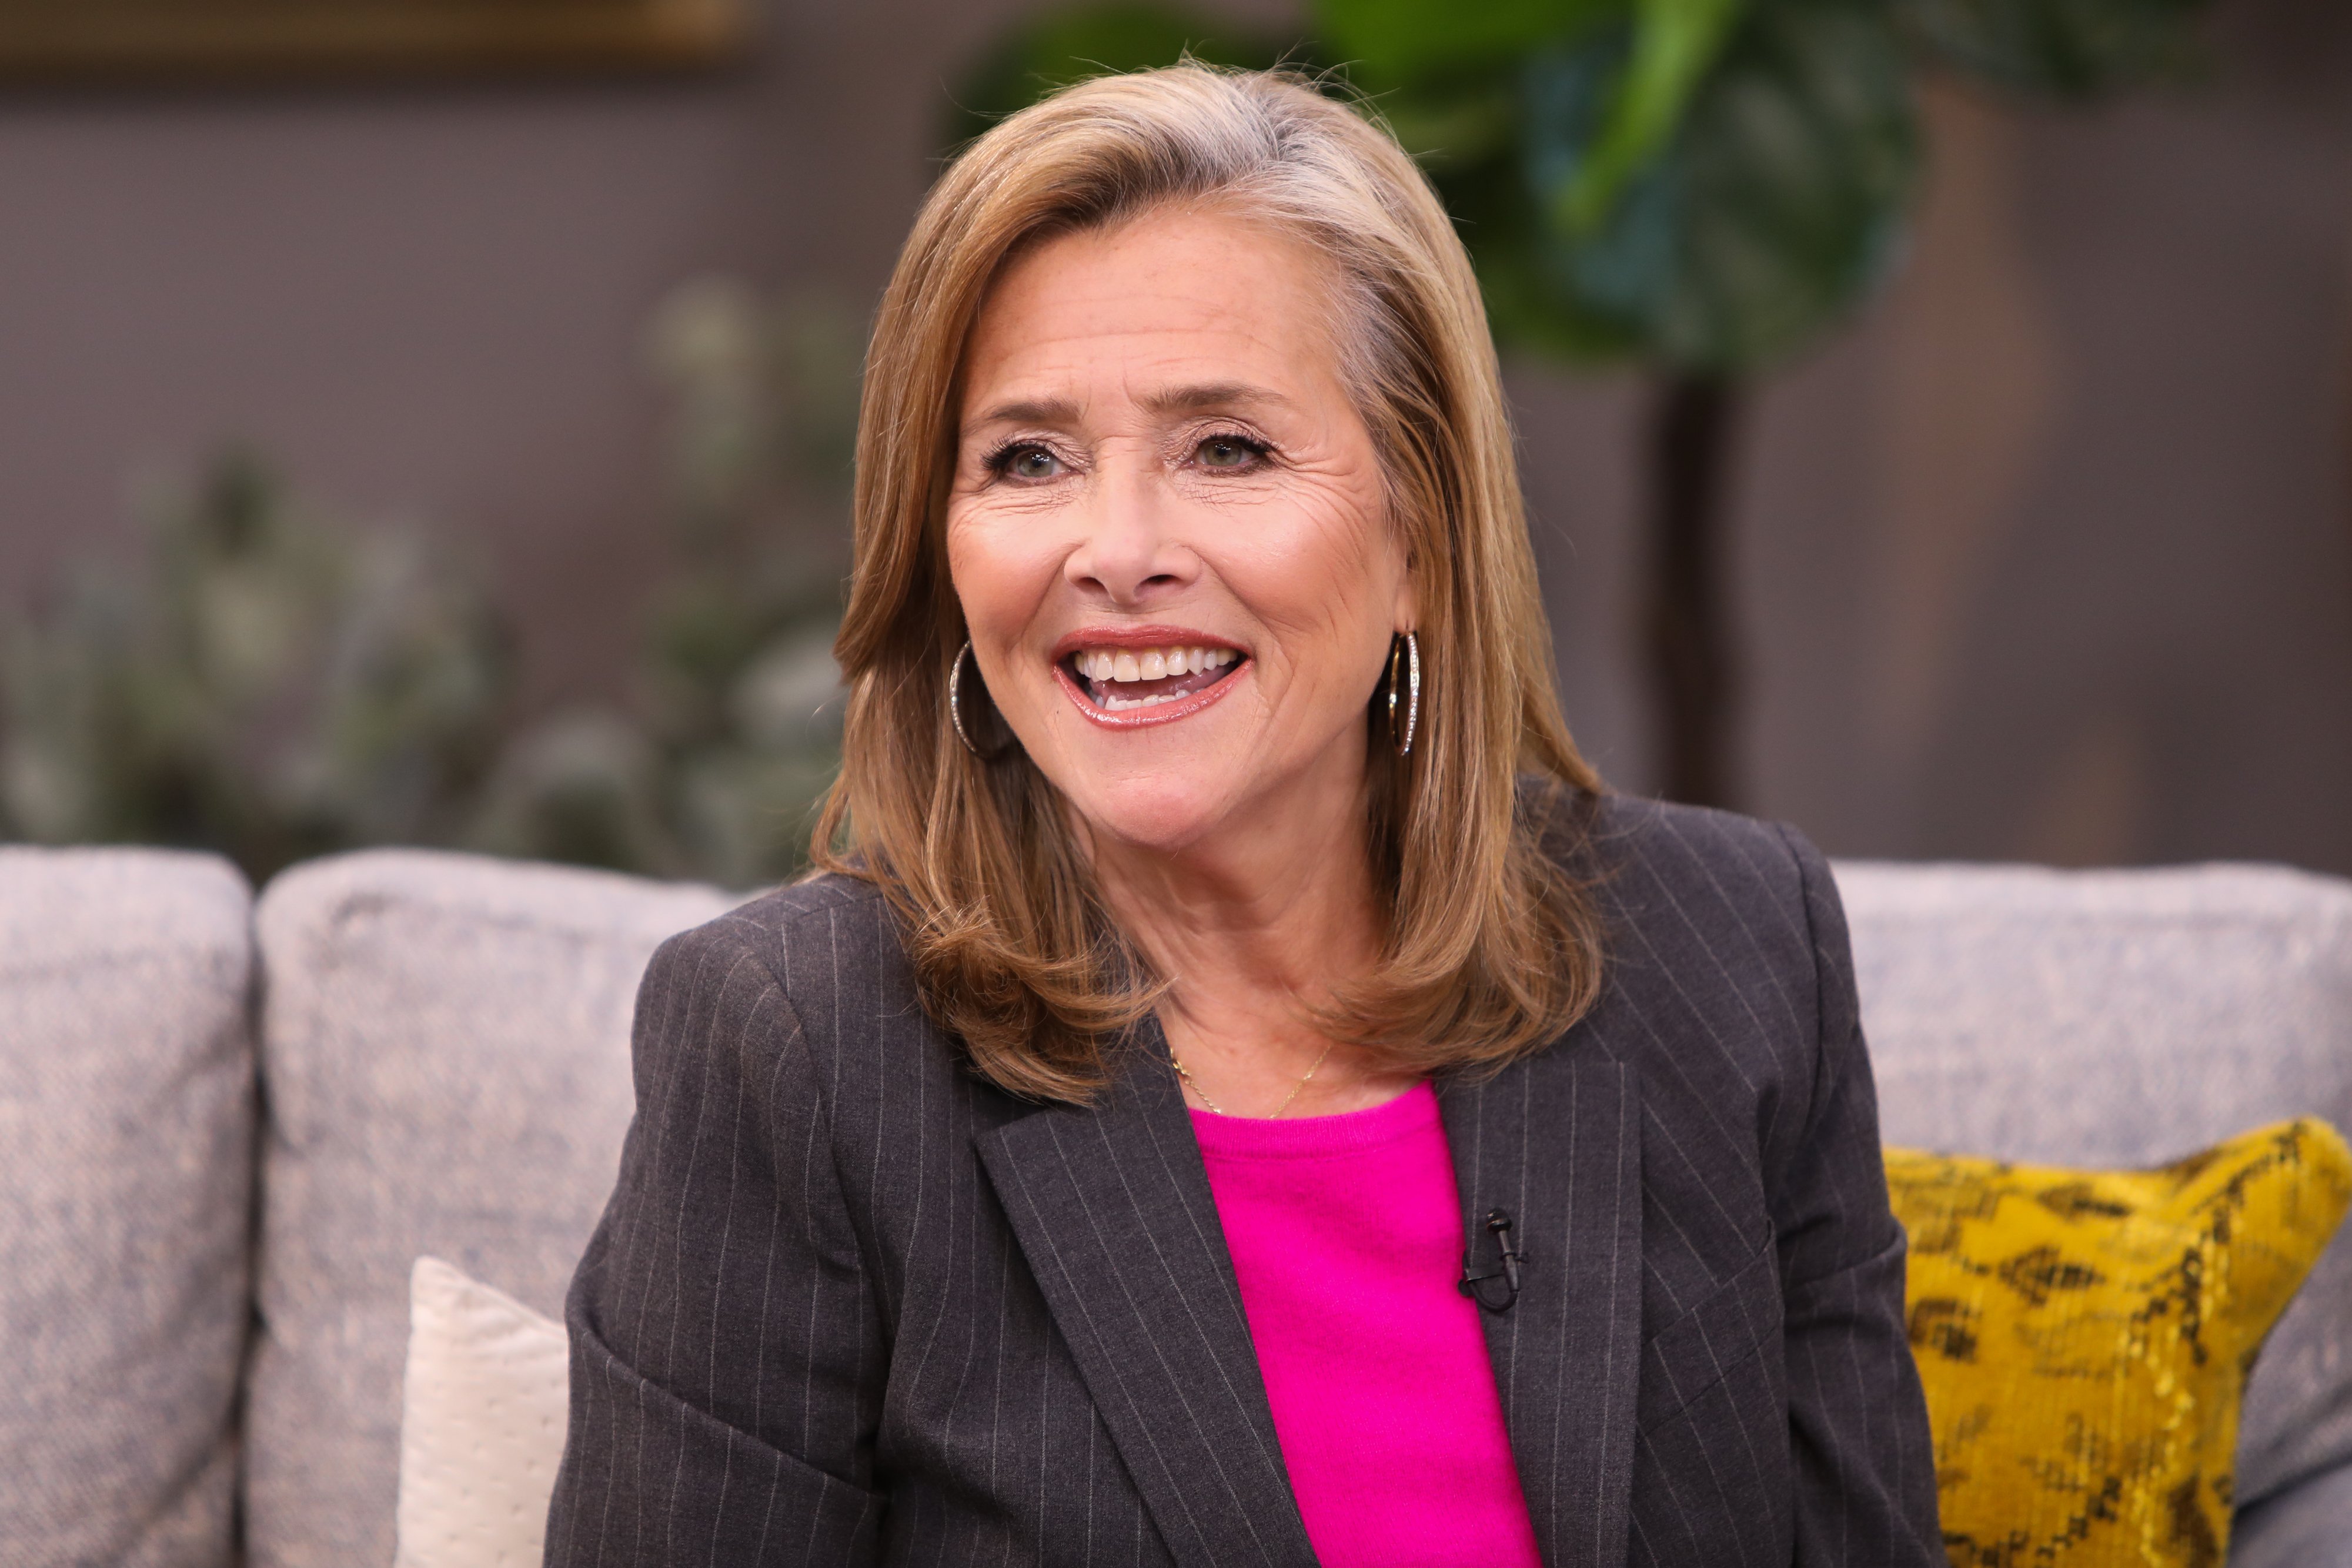 TV Personality Meredith Vieira visits Hallmark Channel's "Home & Family" at Universal Studios Hollywood on October 9, 2019 | Photo: Getty Images